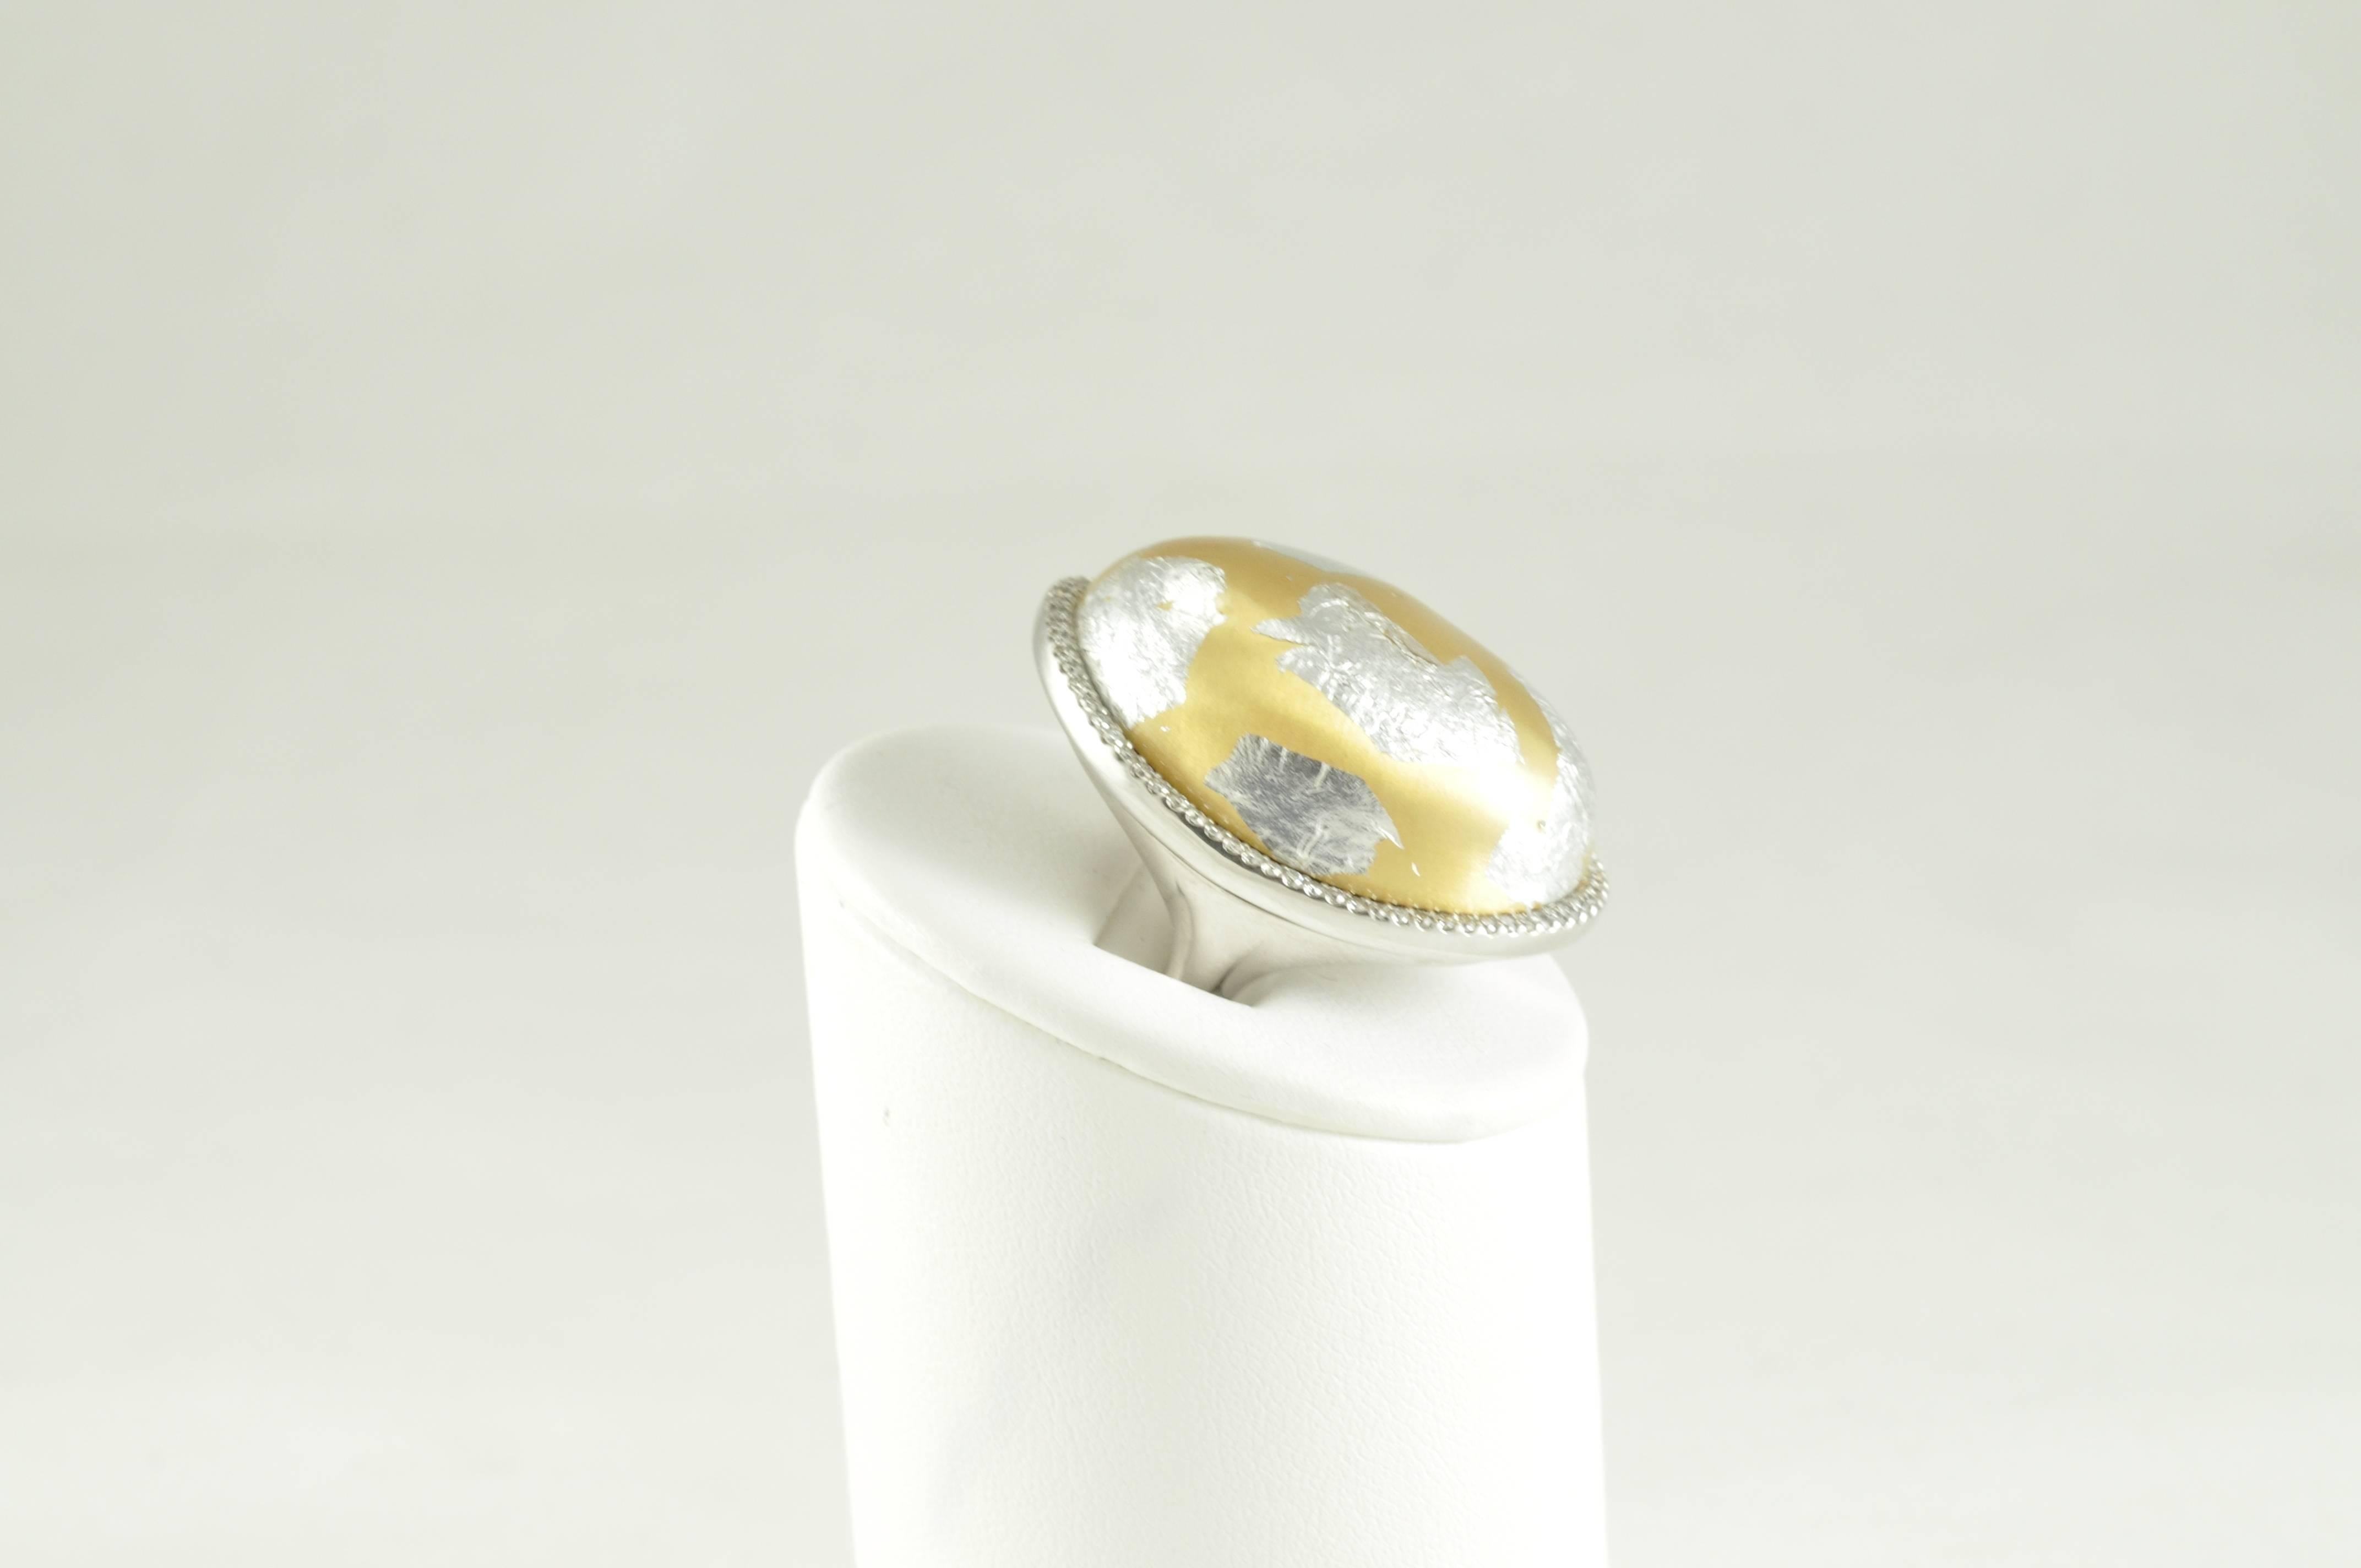 Modern Italian Designed Domed Sterling Silver Gold Enamel Ring with Silver Foliage